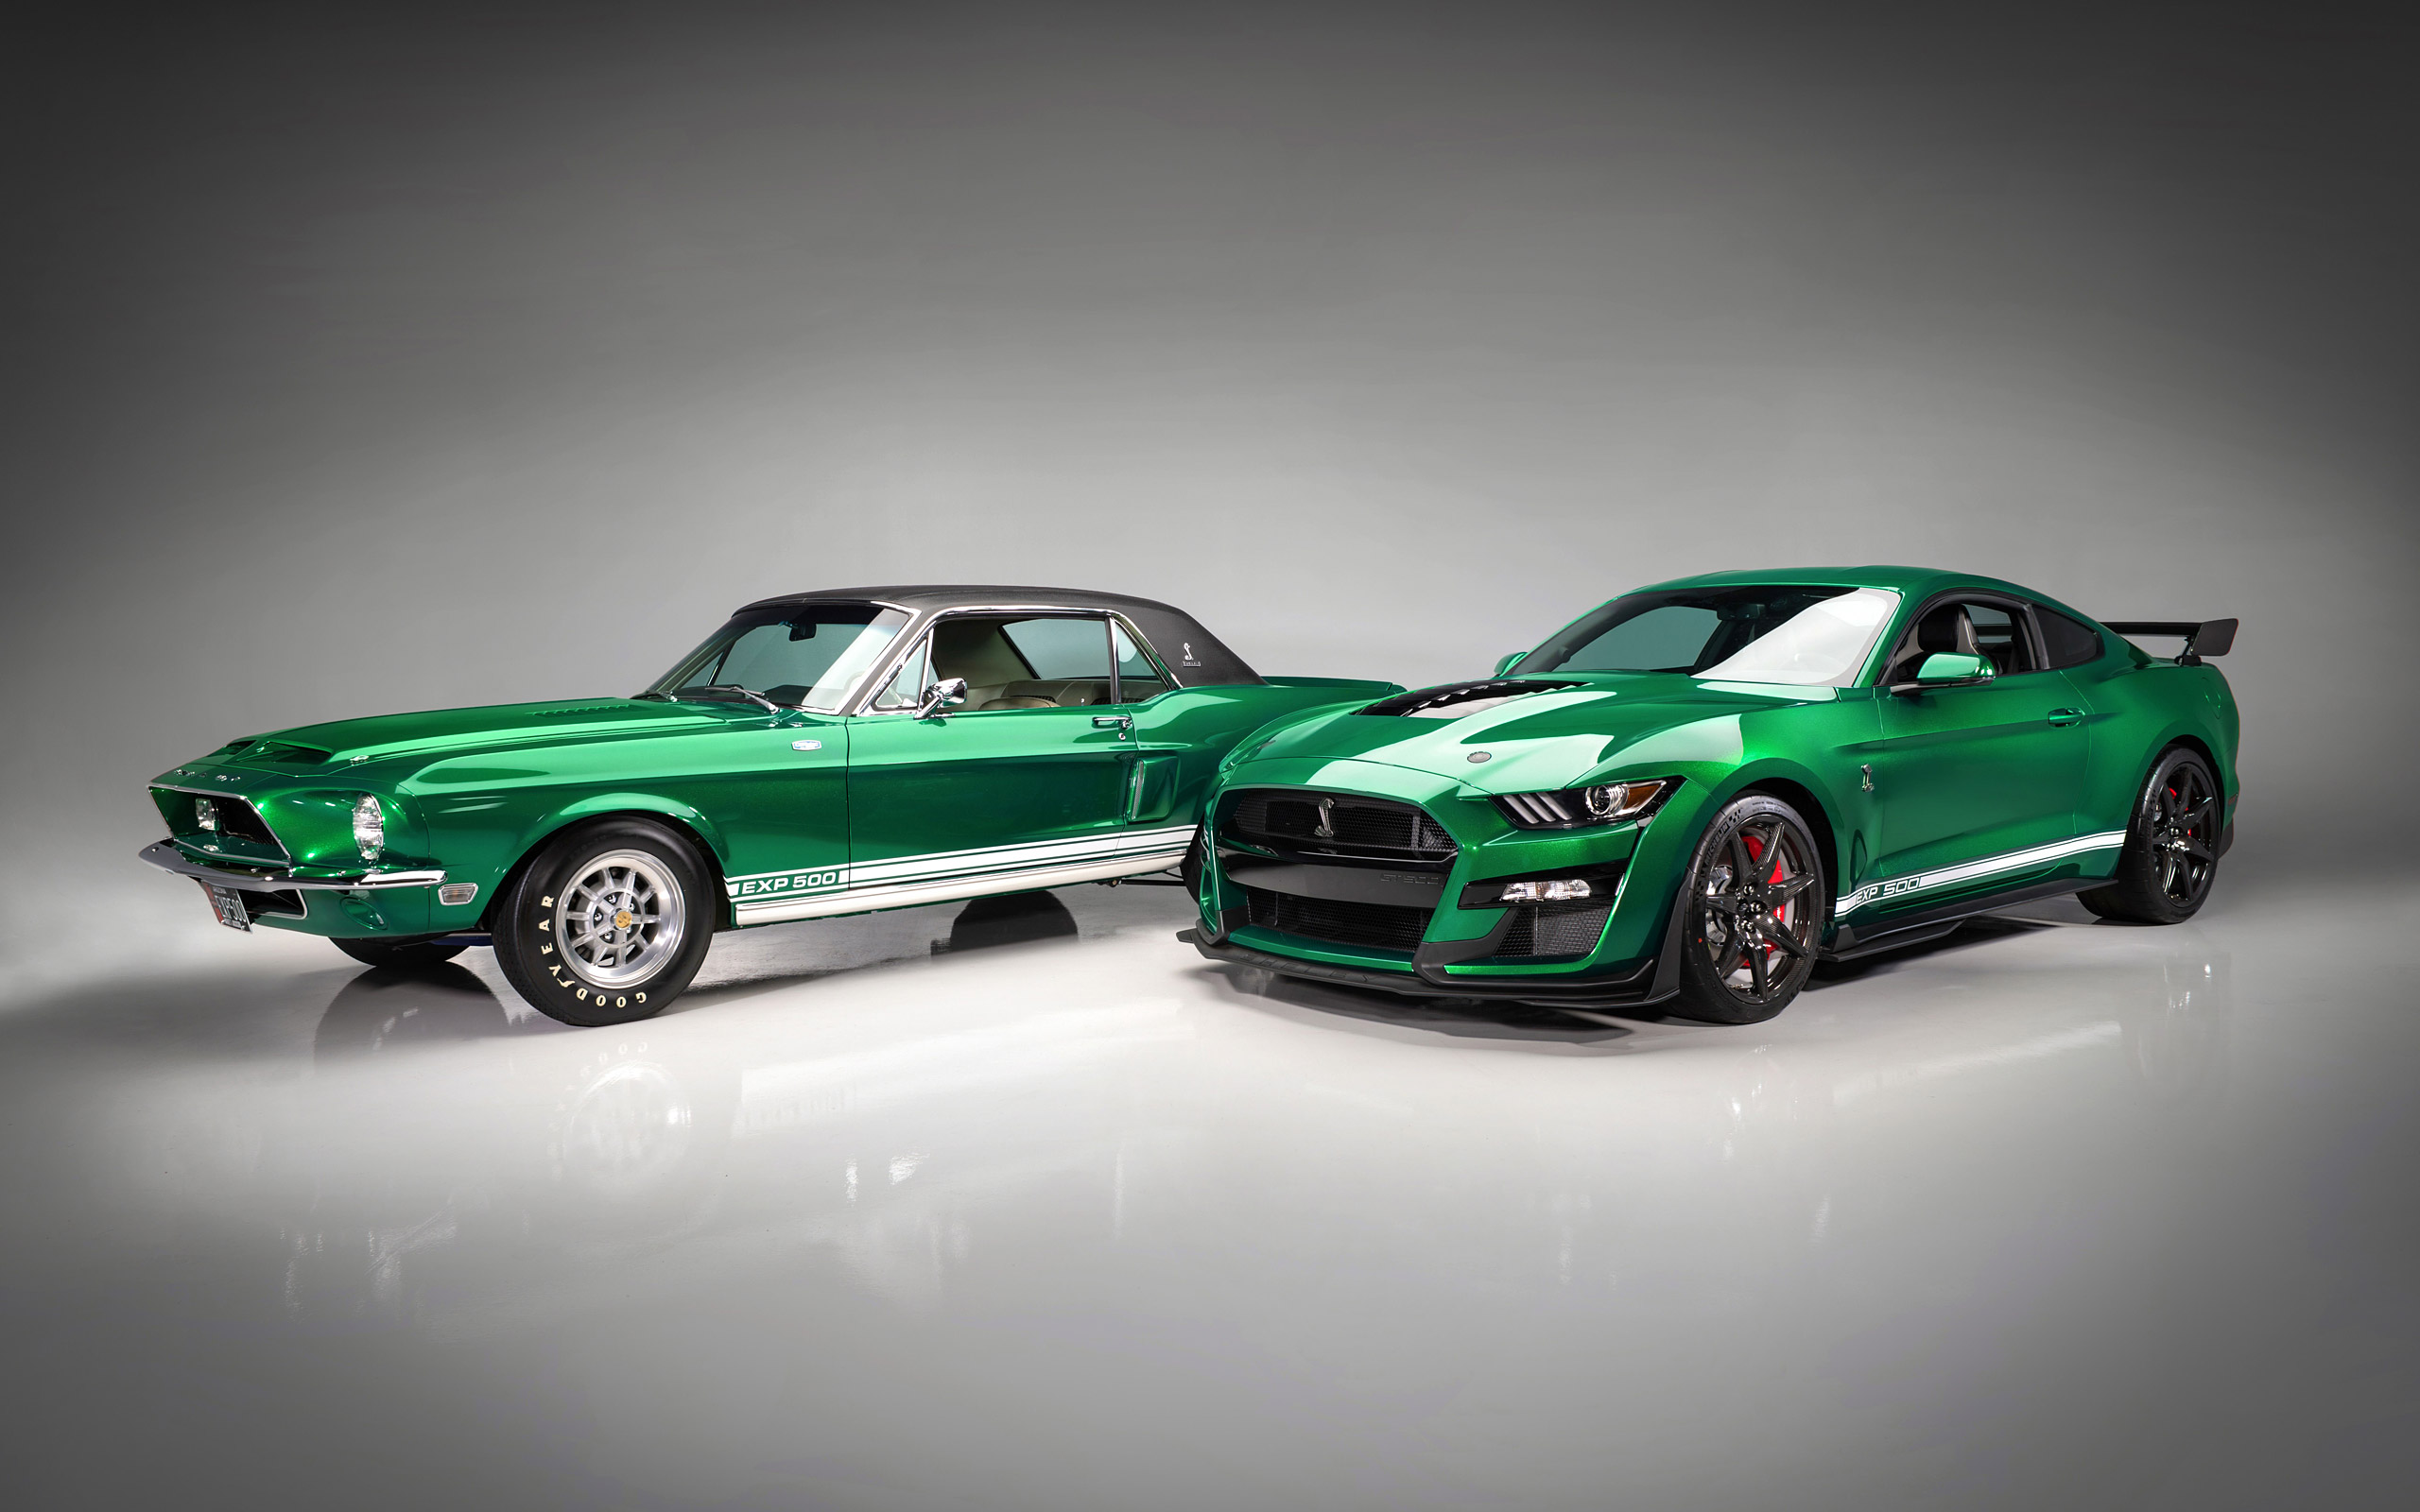  2020 Ford Mustang Shelby GT500 Wallpaper.